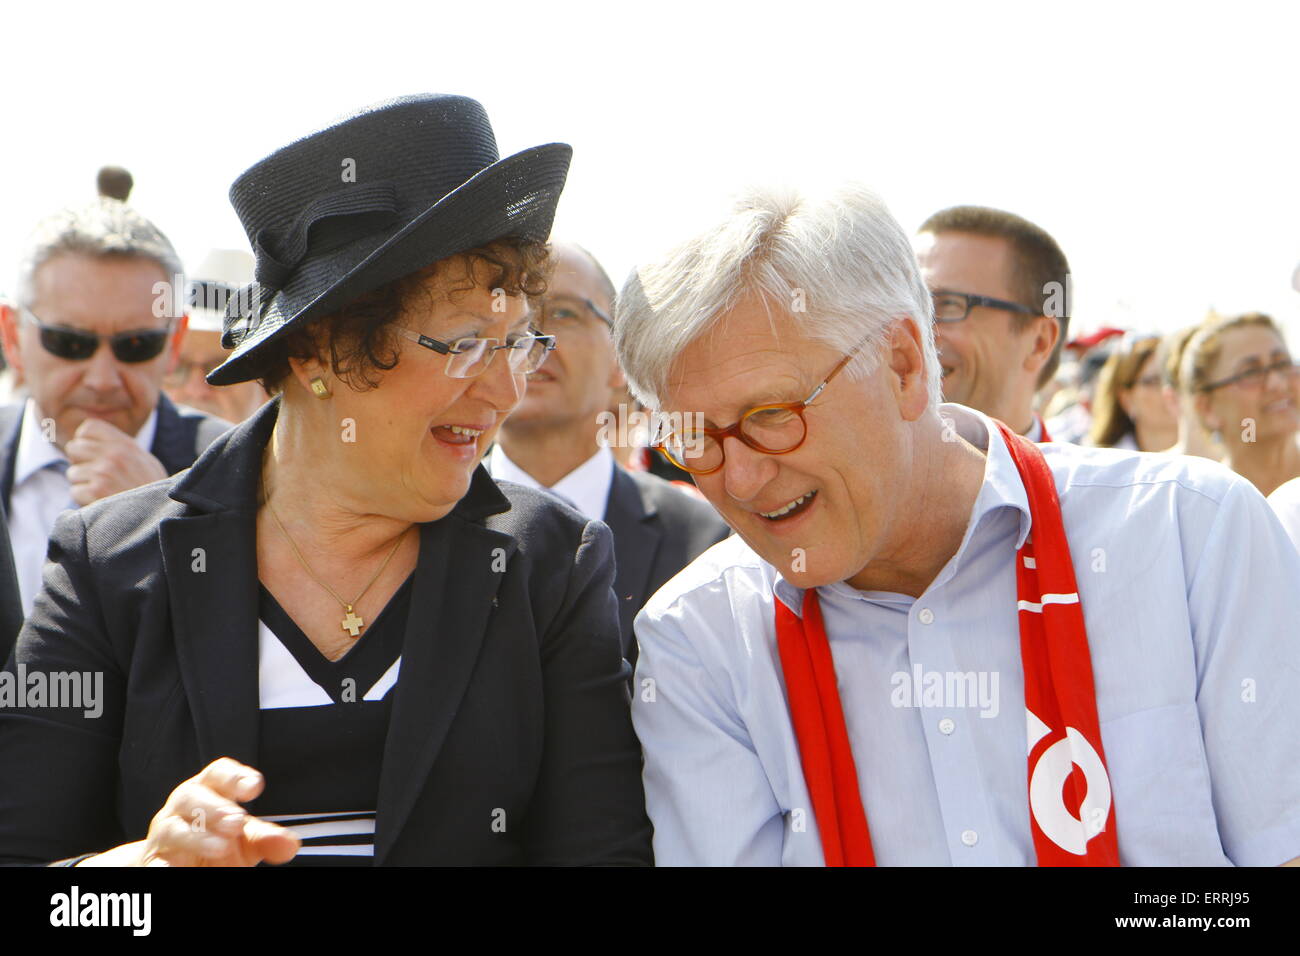 Stuttgart, Germany. 07th June, 2015. Gerlinde Kretschmann (left) the wife of Winfried Kretschmann, the Minister-President of Baden-Württemberg, talks with Heinrich Bedford-Strohm, the Chairman of the Council of the EKD (Evangelical Church in Germany), at the closing ceremony of the 35th German Protestant Church Congress. 95,000 worshippers attended the closing open air service of the 35th German Protestant Church Congress in Stuttgart. © Michael Debets/Pacific Press/Alamy Live News Stock Photo